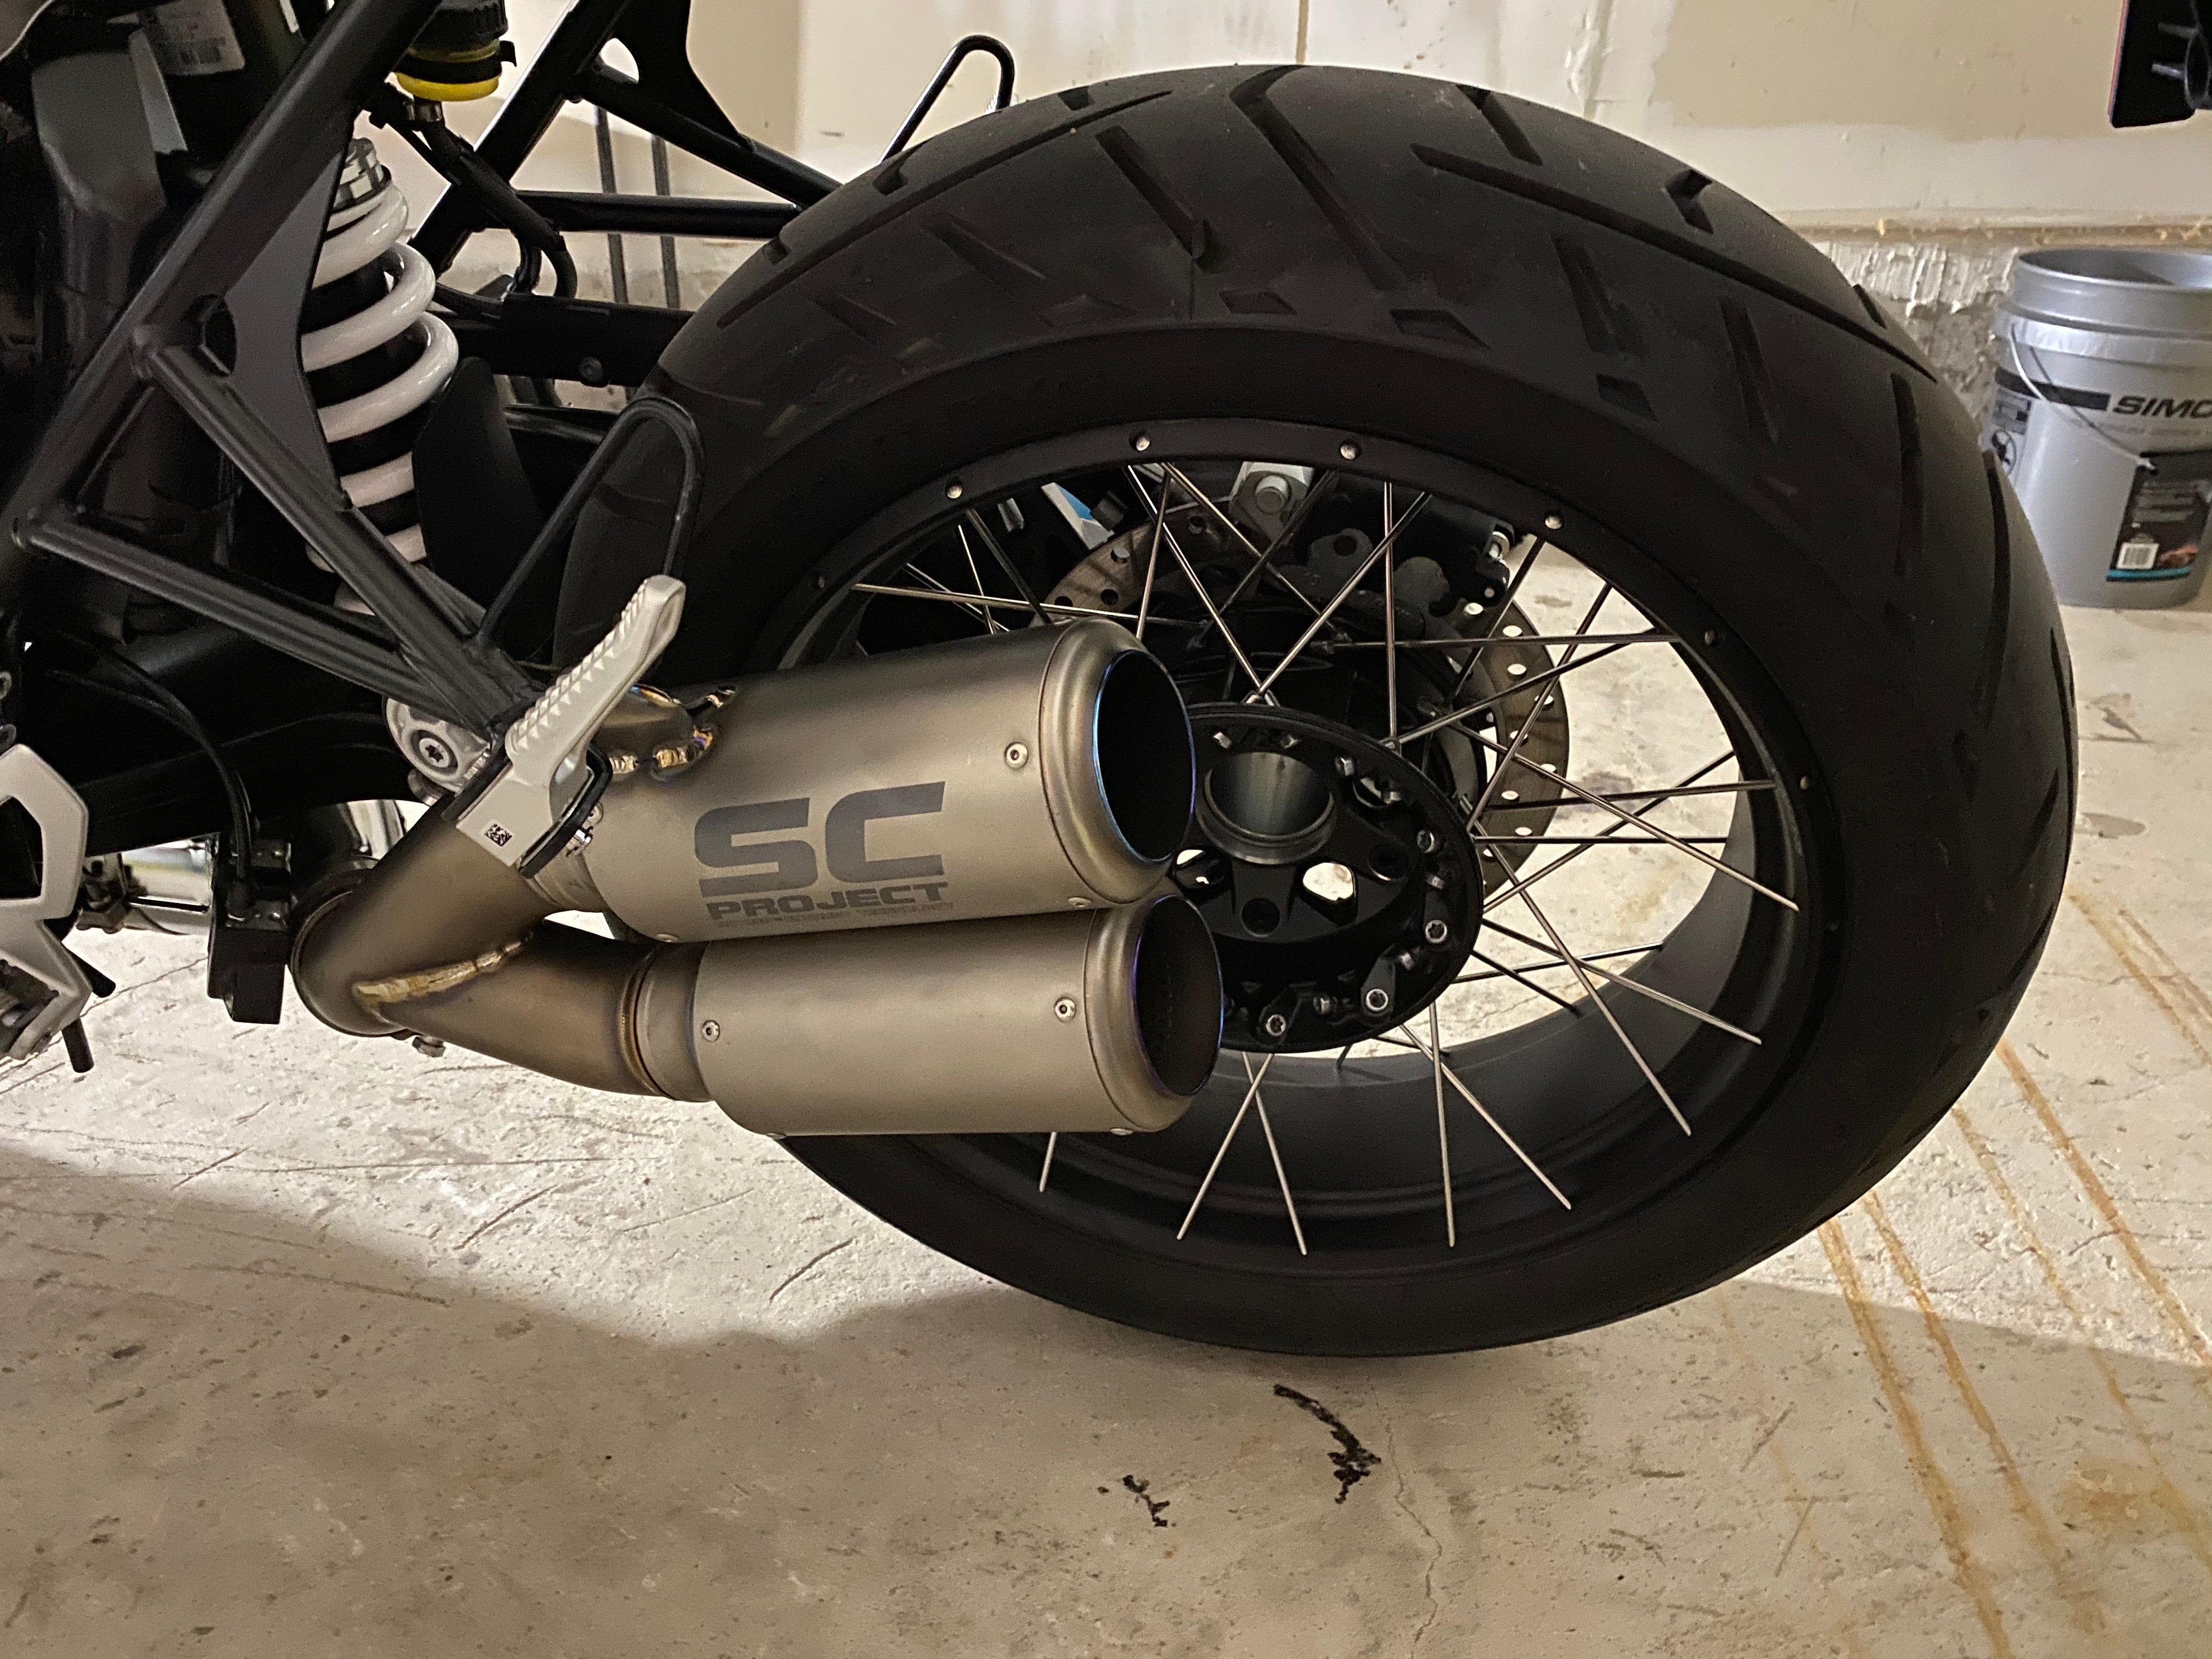 Sc Project Cr T Twin Review And Advice Bmw Ninet Forum